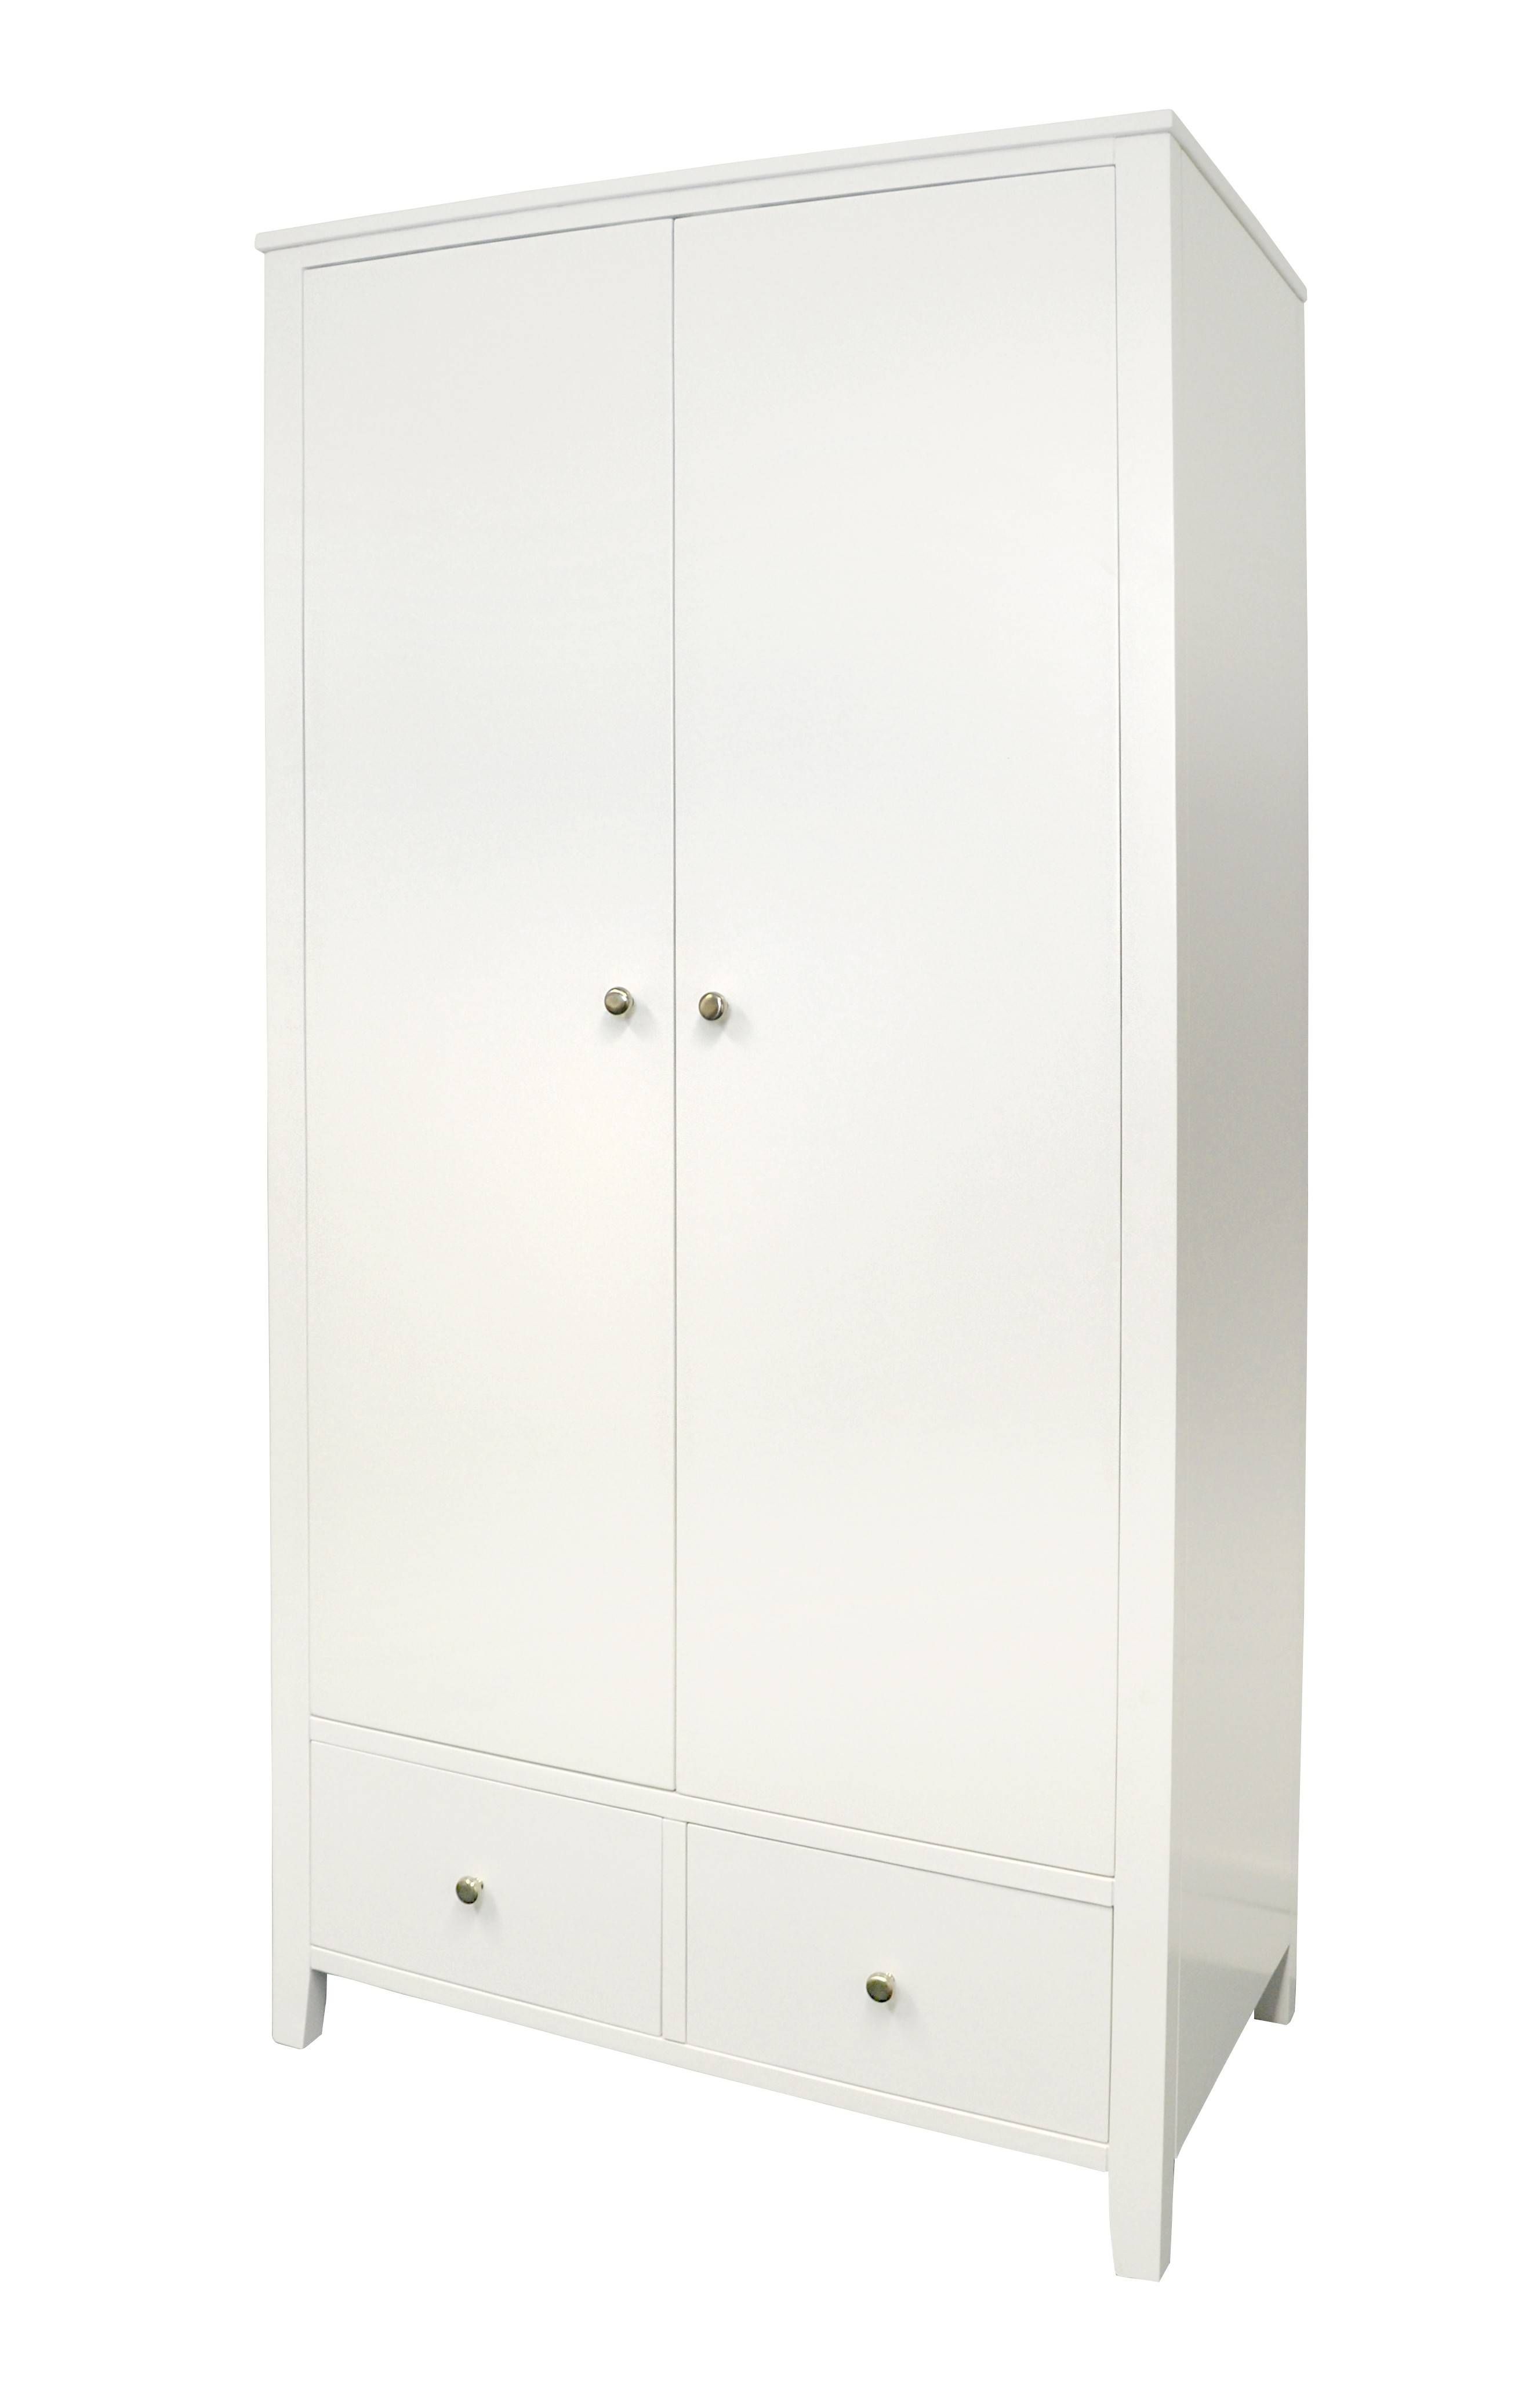 Brooklyn White Double Wardrobe With 2 Drawers| Bedroom Furniture Intended For Large White Wardrobes With Drawers (View 9 of 15)